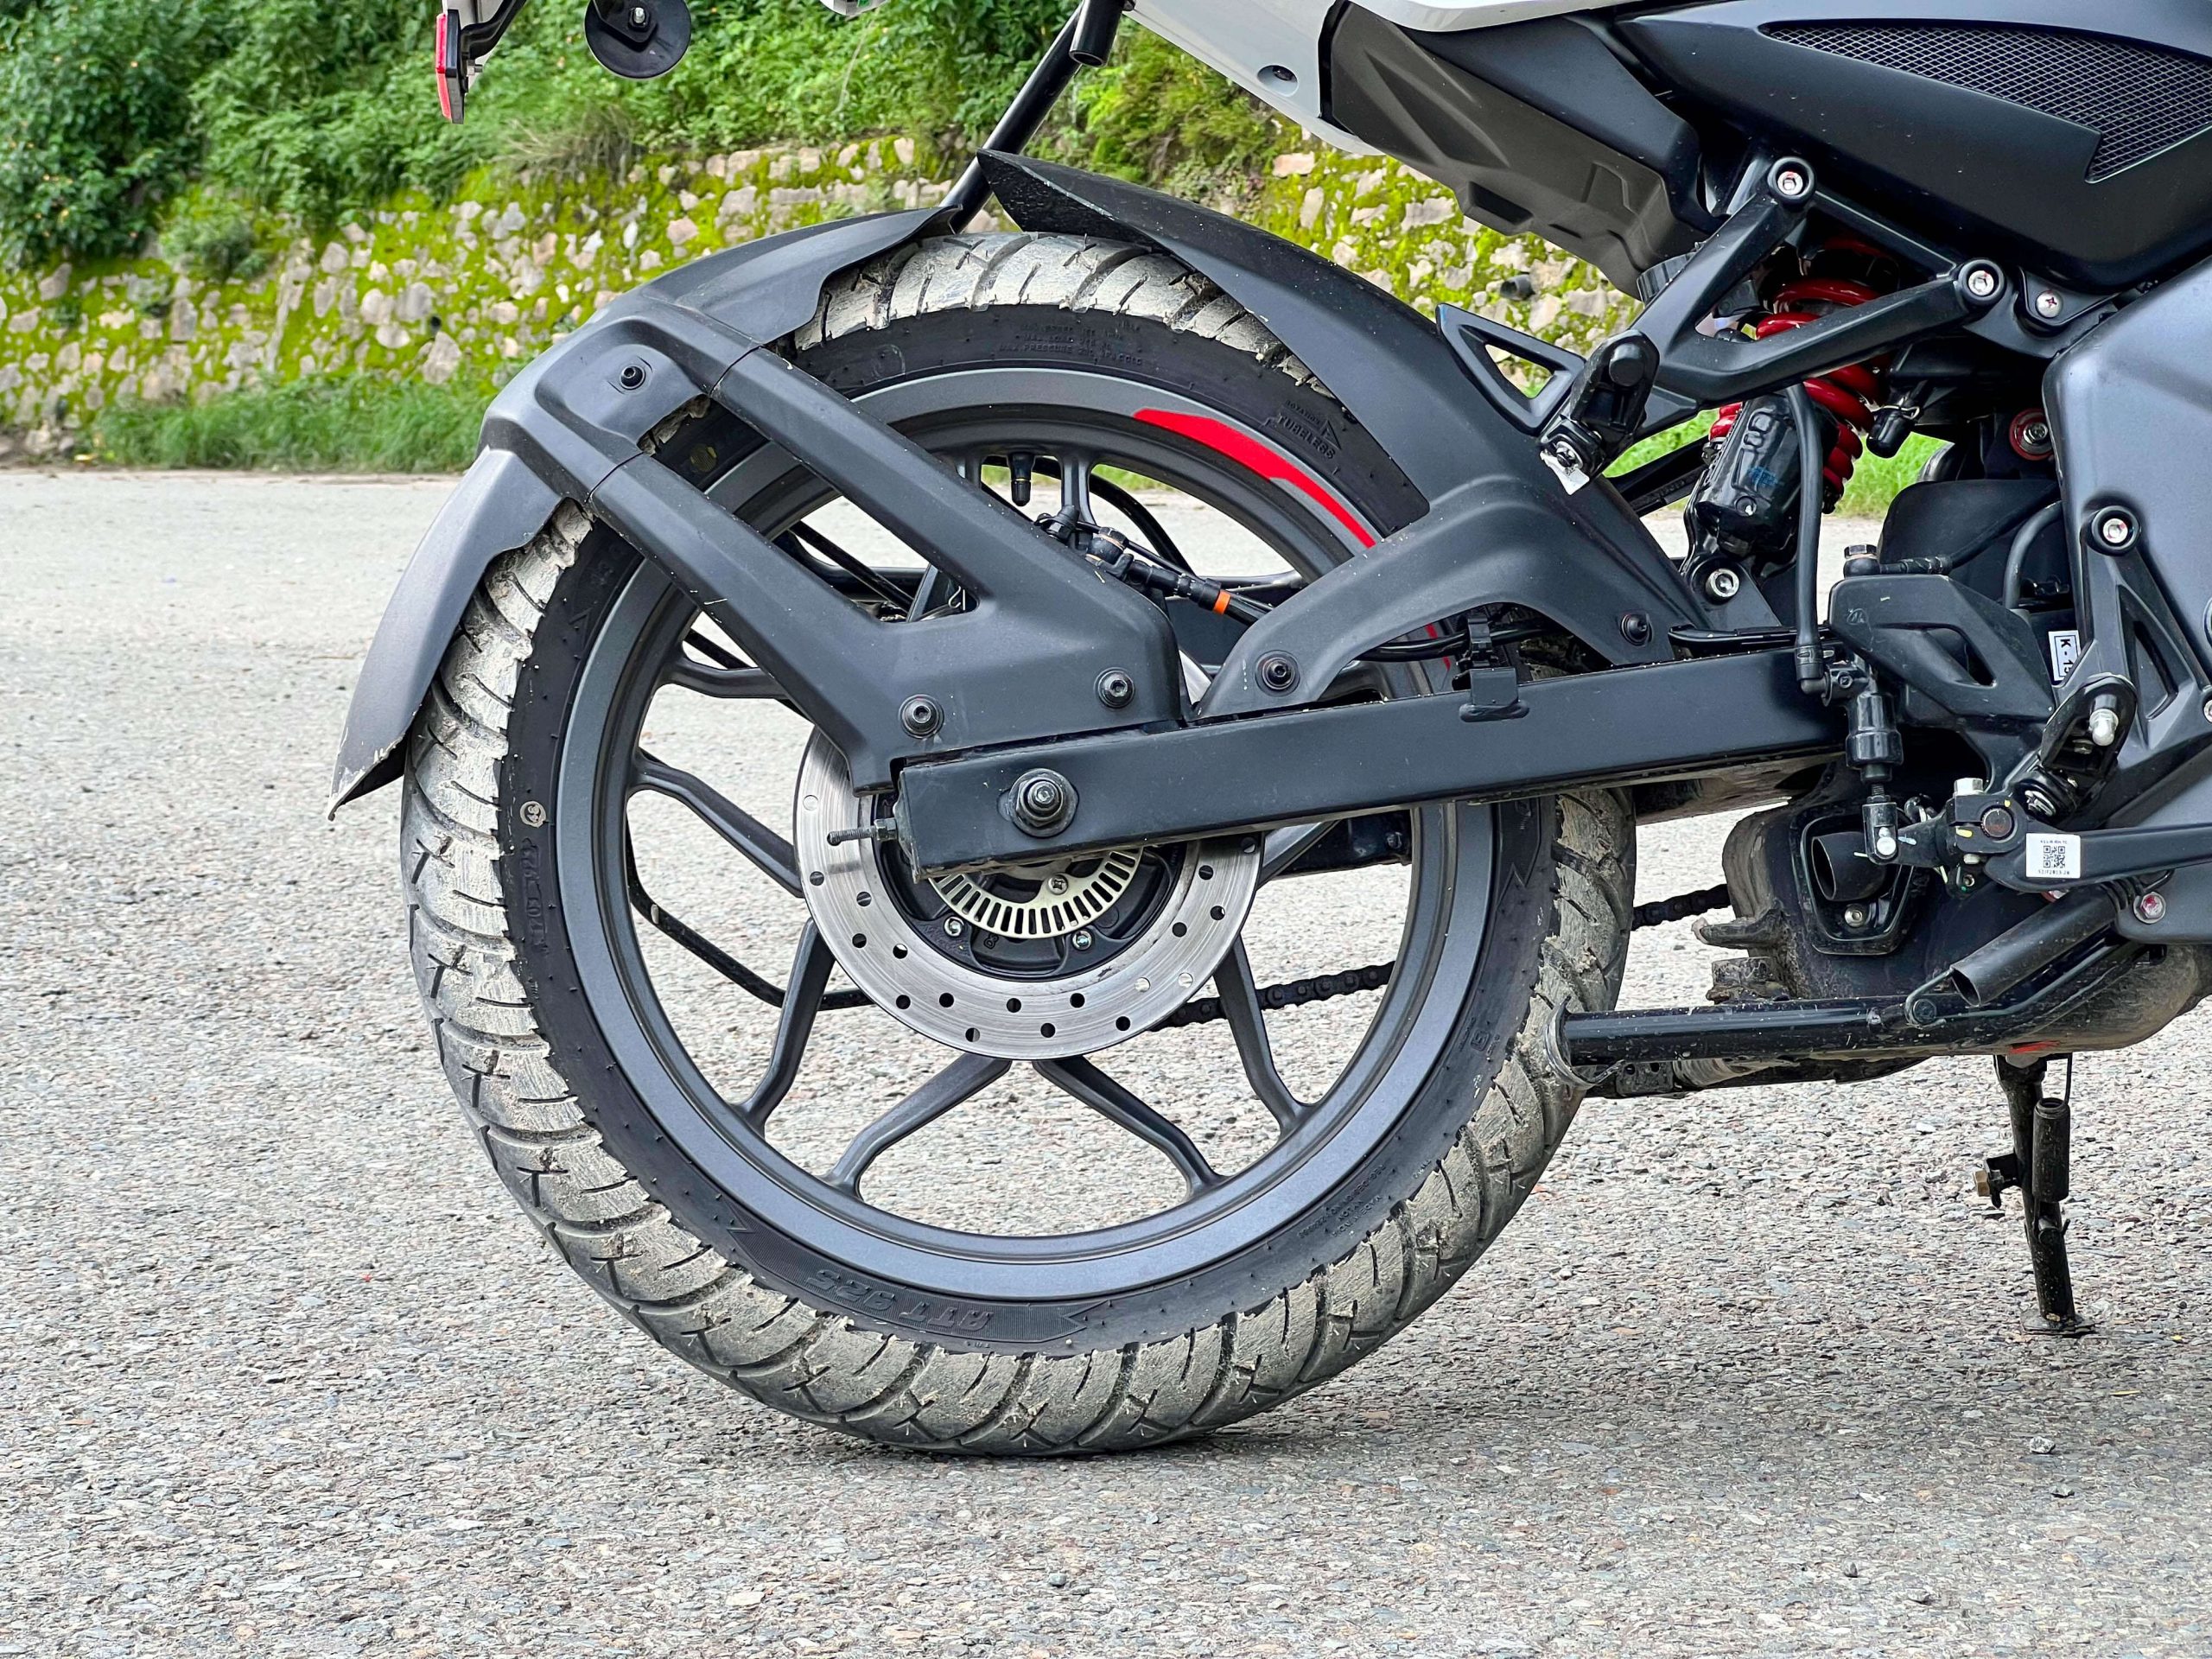 Wider Tyres with Dual-Channel ABS